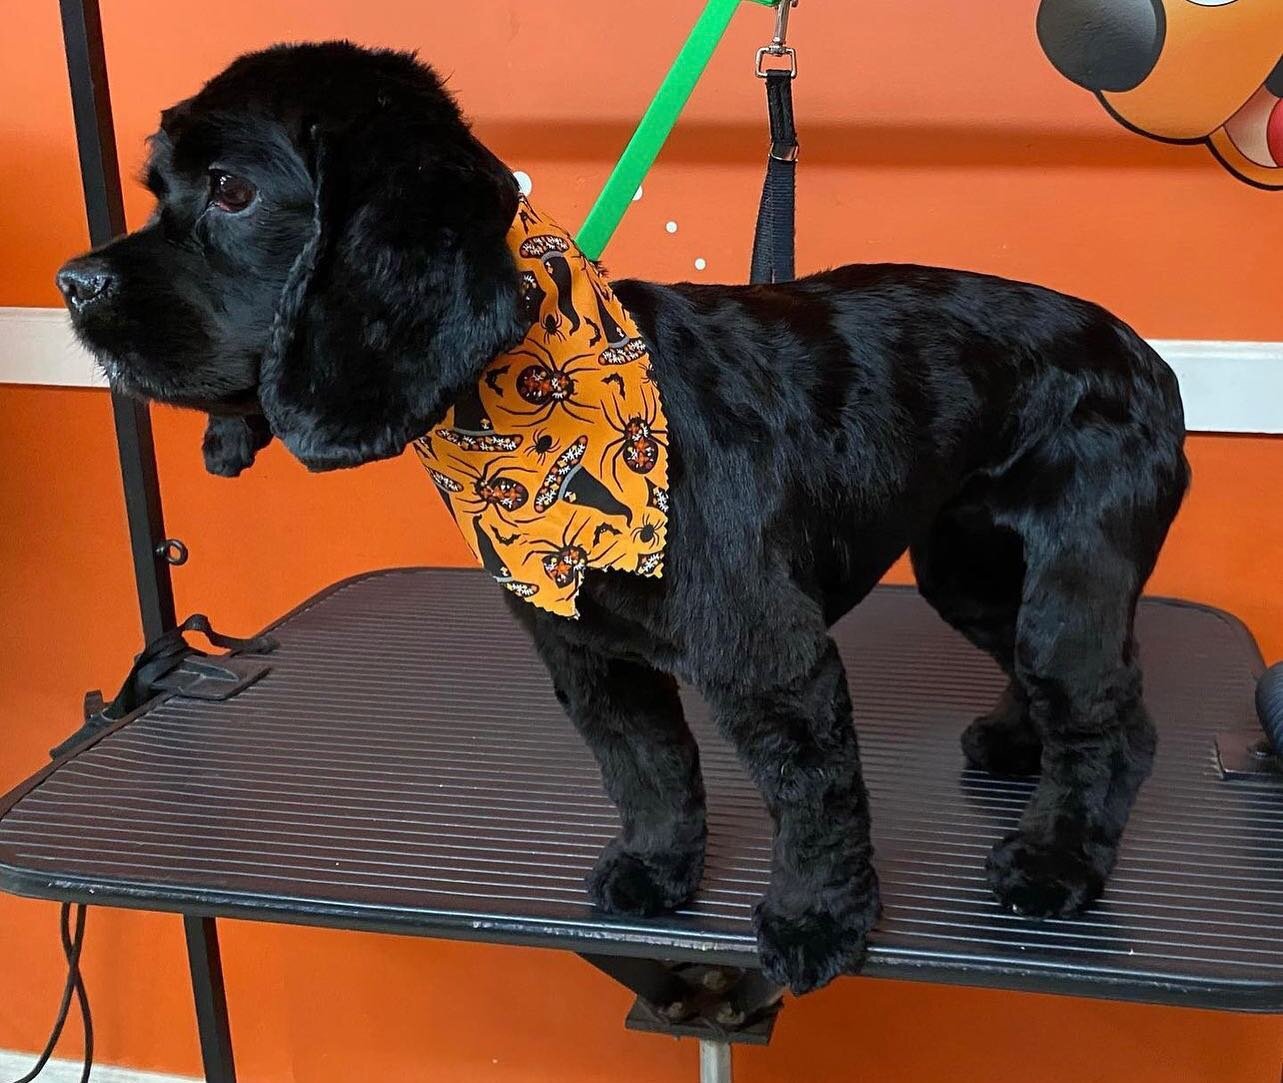 🕸️🦇🐾
Spooky Season is coming up 

Don&rsquo;t forget to get your pups ready for the summer and for spooky season 

#Spooky #spookyseason #supportsmallbusinesses #shopsmall #womanowned #pups #doglover #dogspa #petgroomer